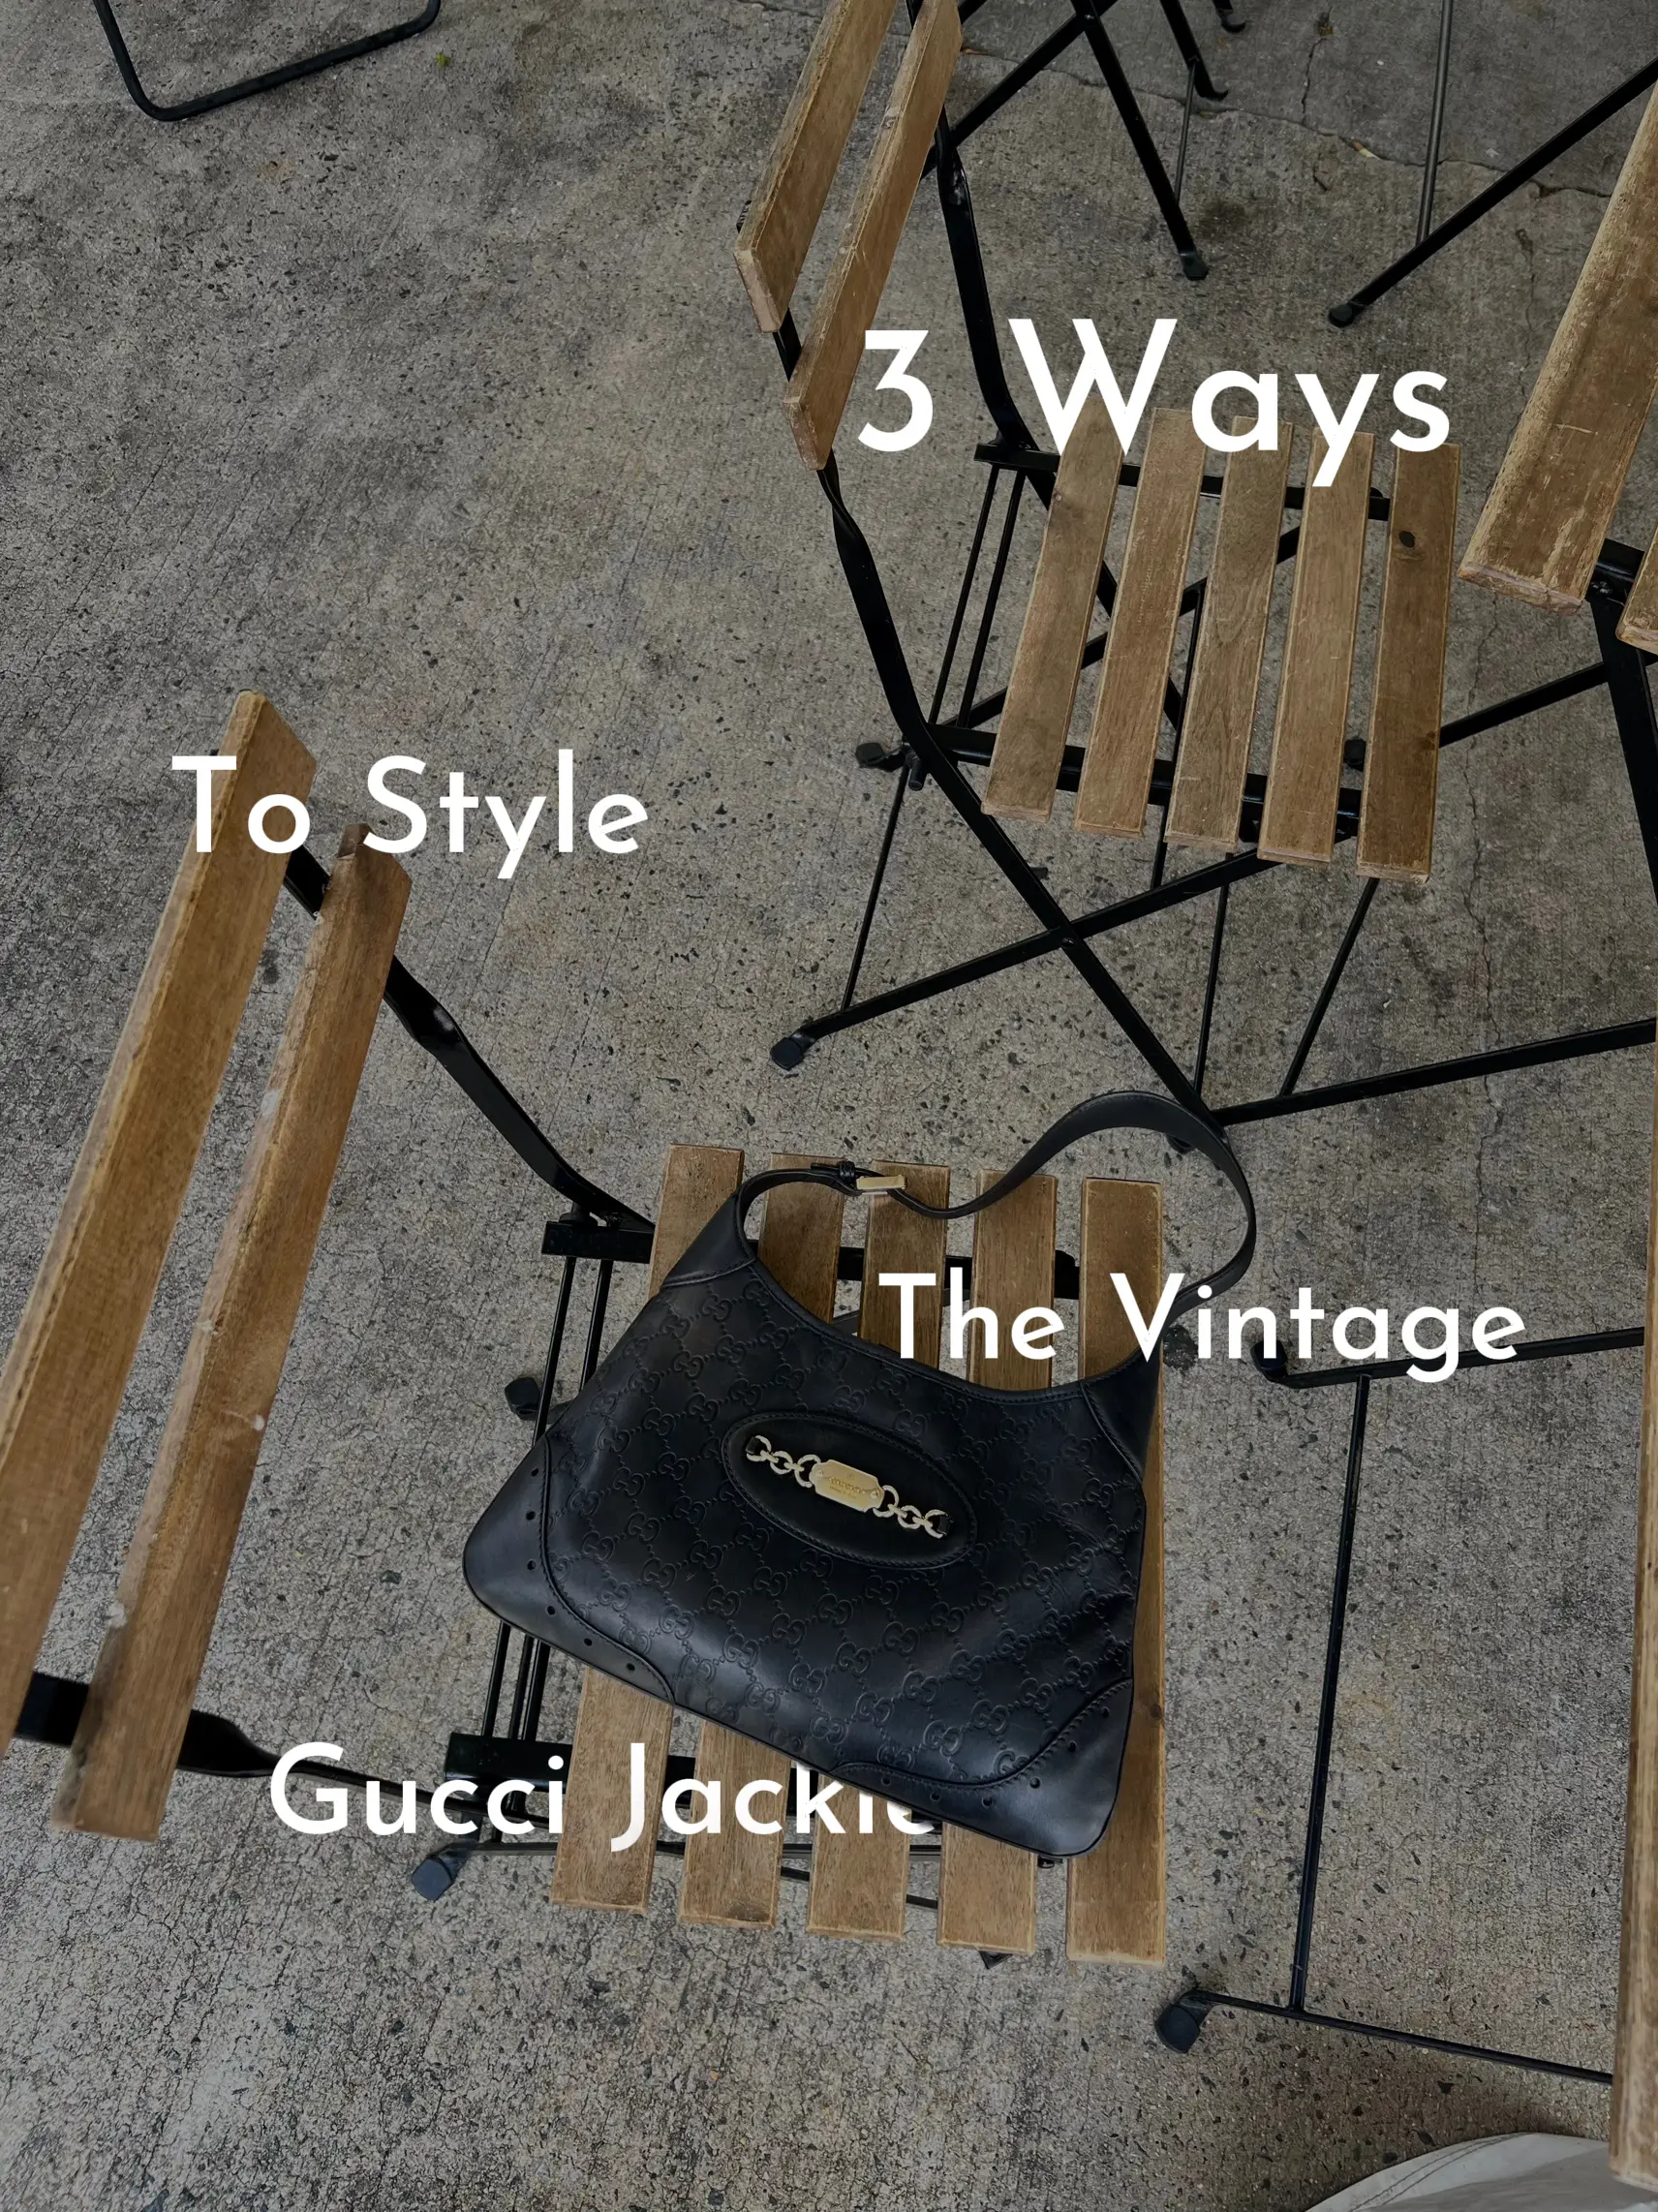 3 Ways To Style the Vintage Gucci Jackie